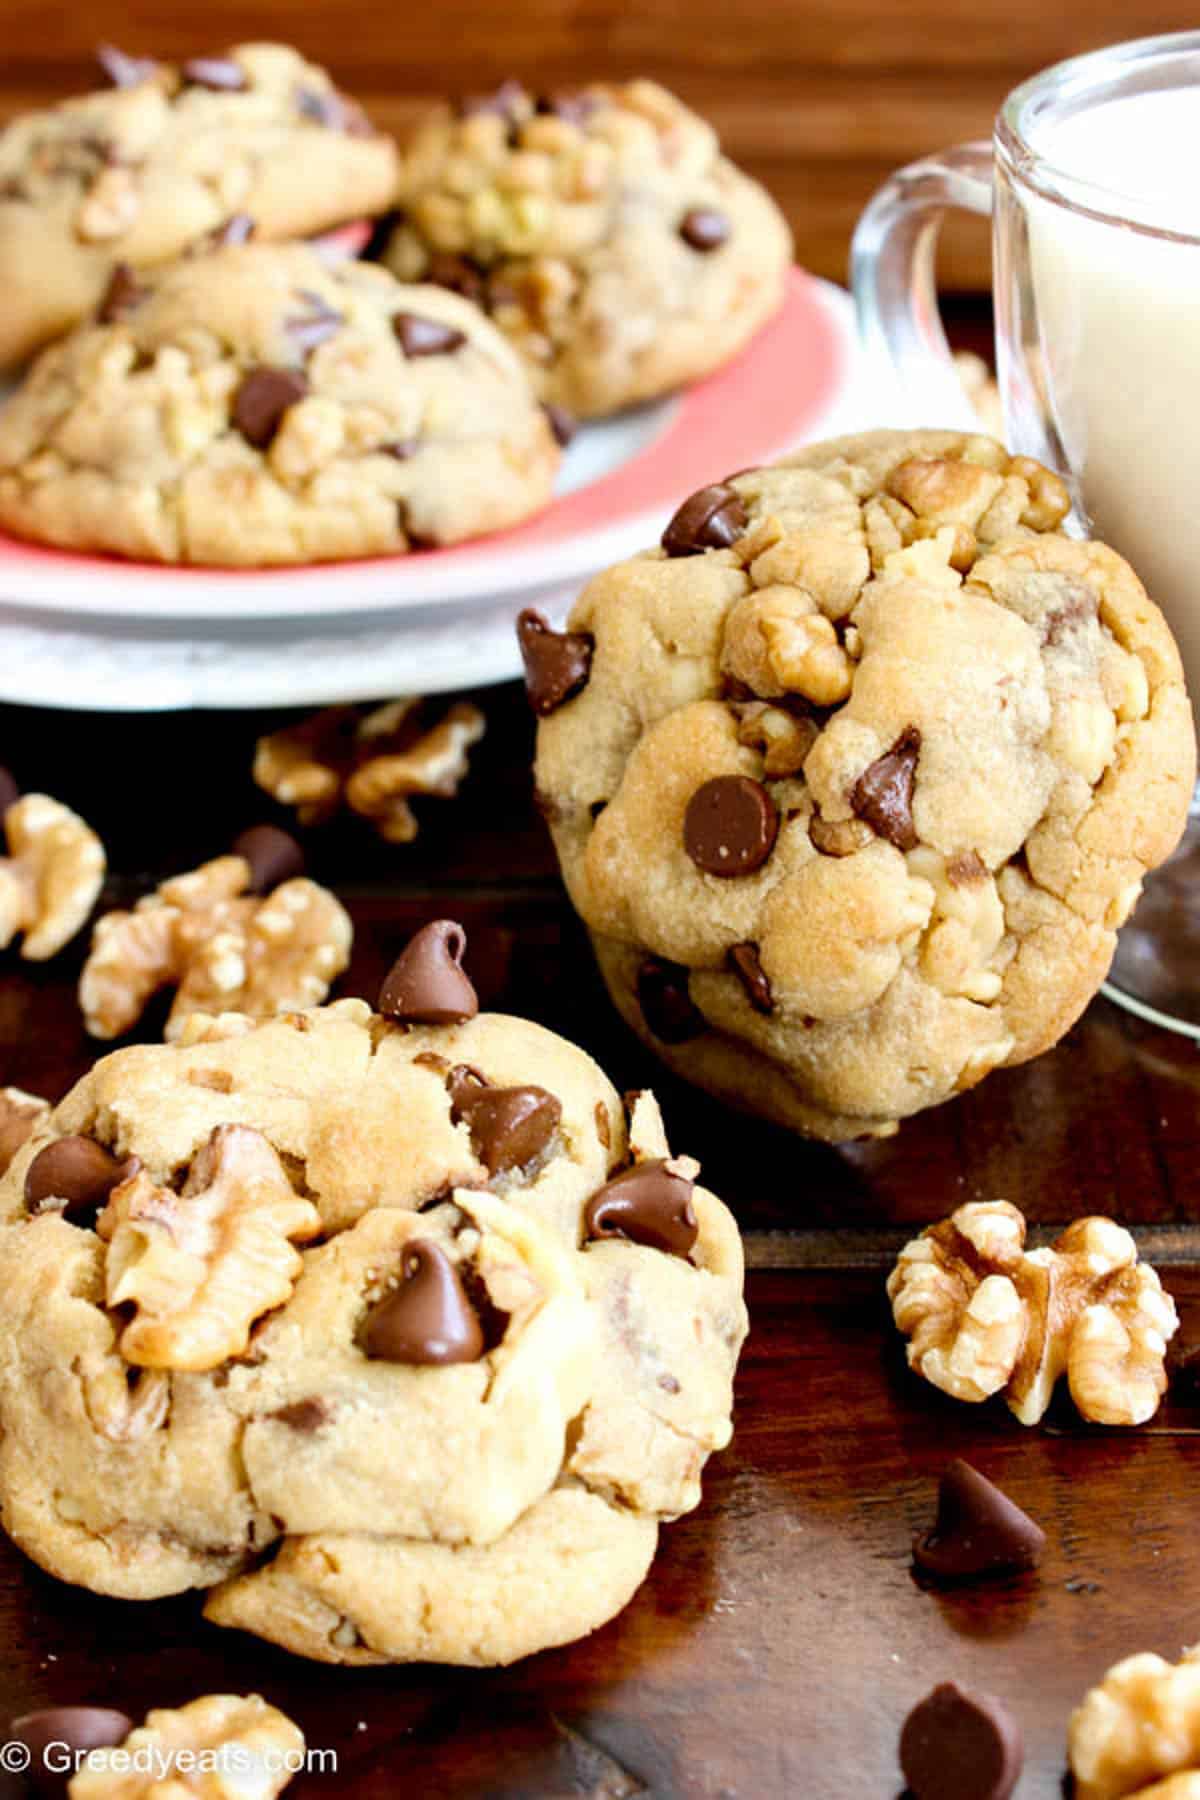 Soft, thick and fluffy Chocolate Chip Cookies with toasted walnuts and melty chocolate chips.